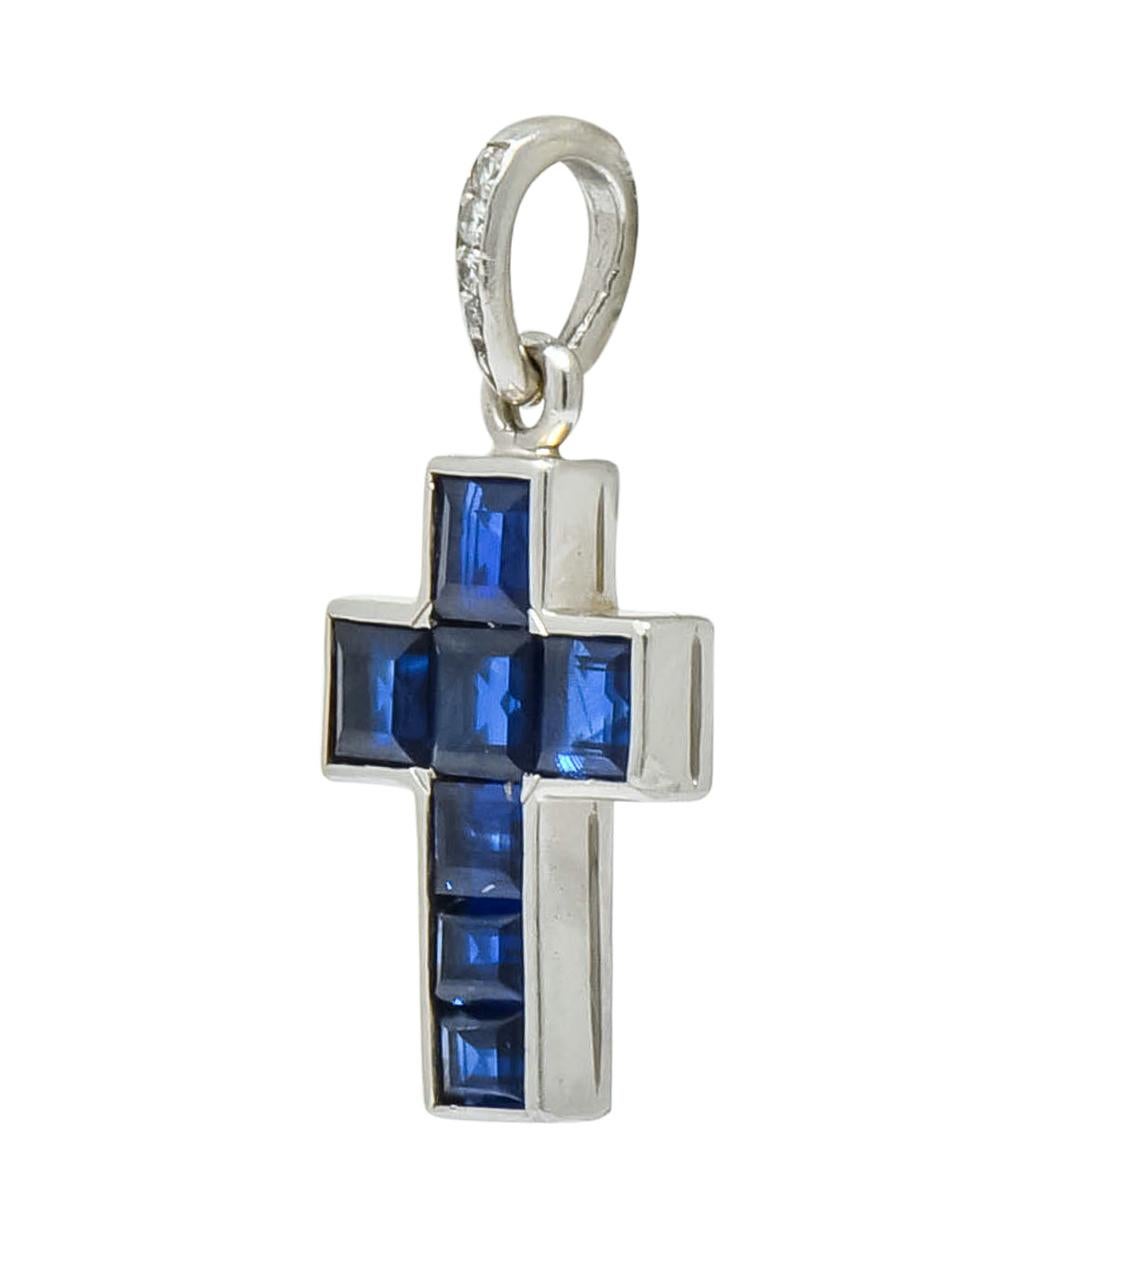 Charm designed as calibré cut sapphire weighing approximately 1.20 carats total, transparent and medium-dark royal blue in color 

Channel set in a platinum frame completed by bale accented by round brilliant cut diamonds weighing approximately 0.05